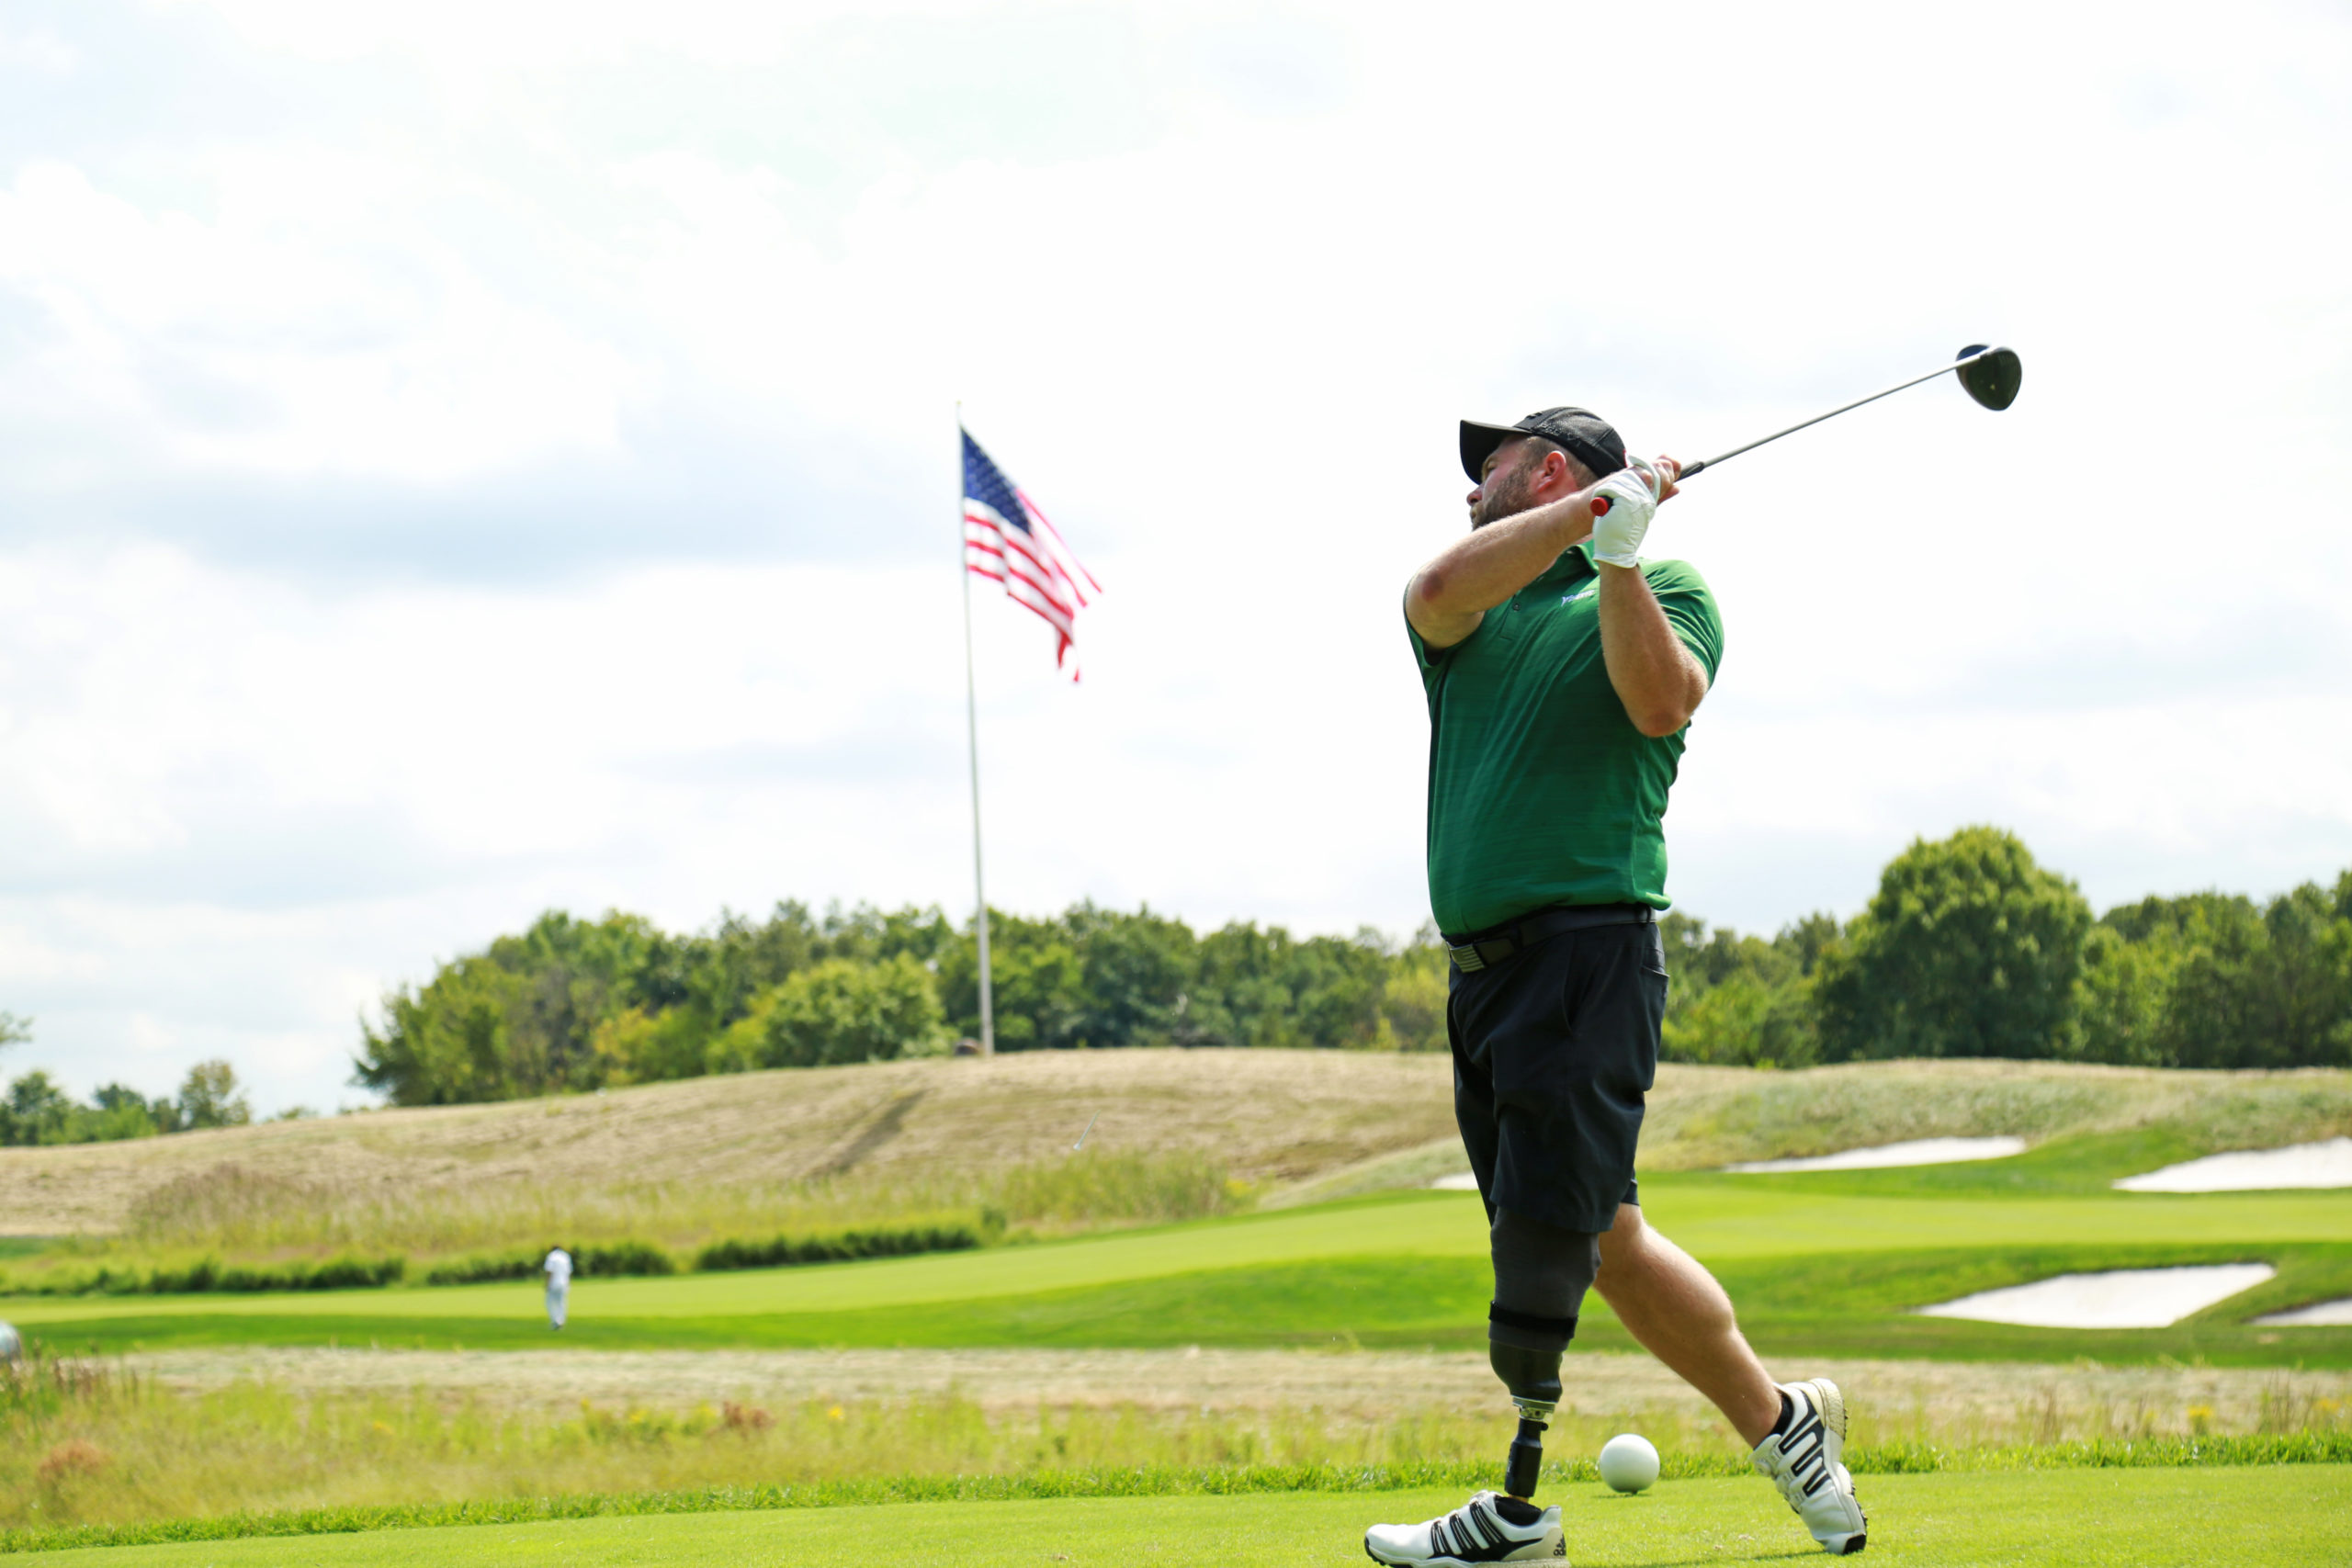 Leg amputee golfer swinging with US flag in background